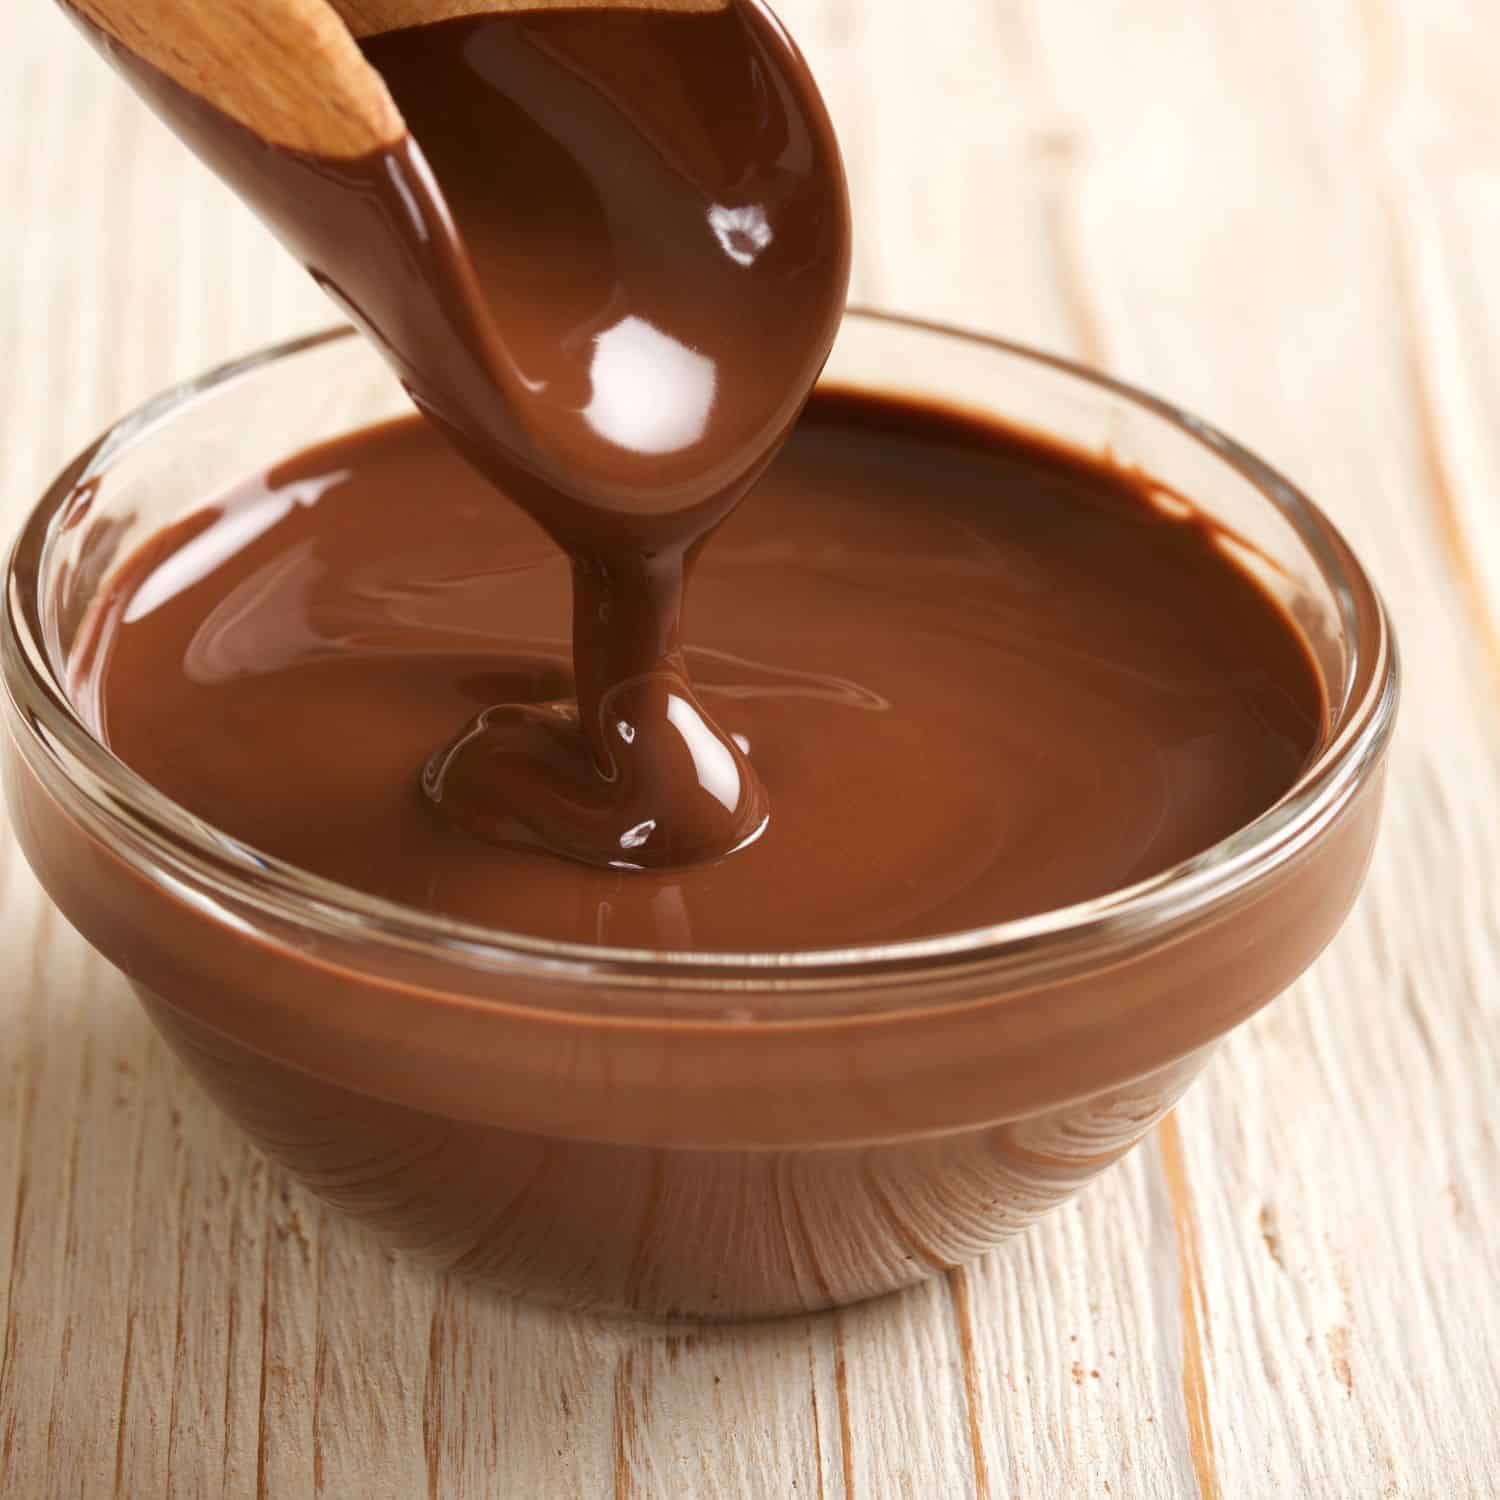 photo of melted chocolate for chocolate recipes